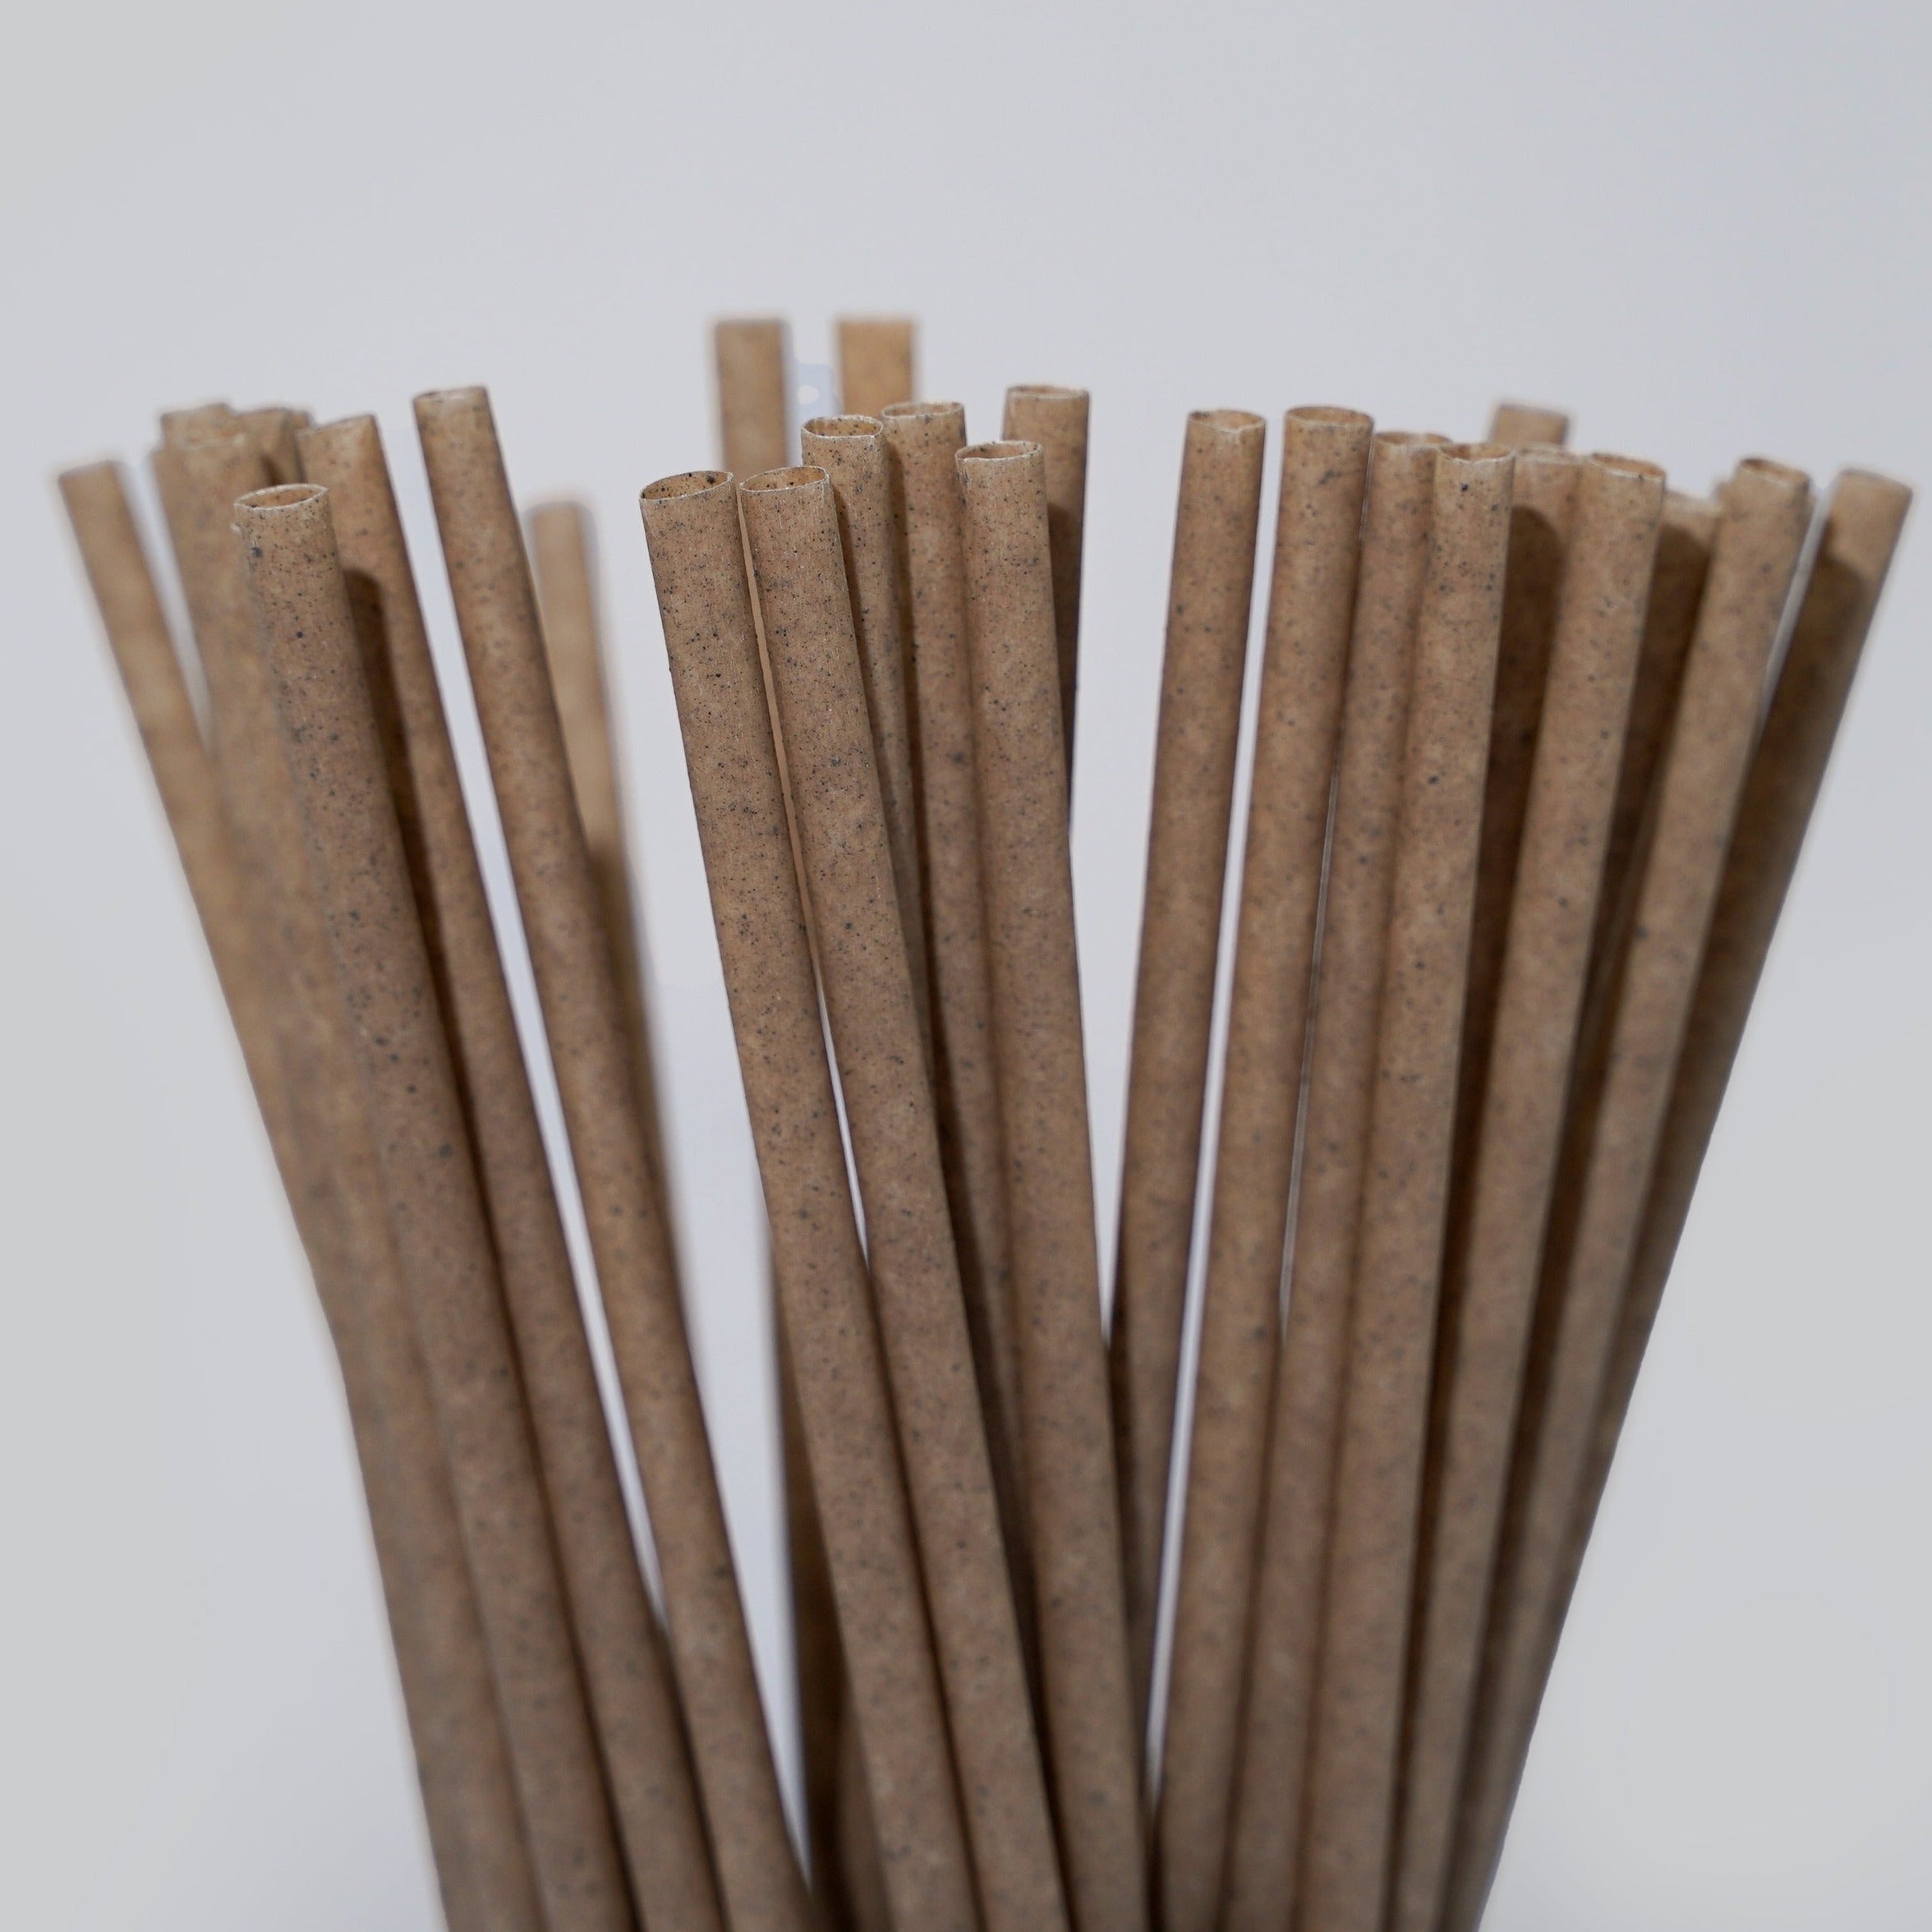 Coffee Drinking Straws (Wholesale/Bulk), Cocktail Size - 1000 count by EQUO